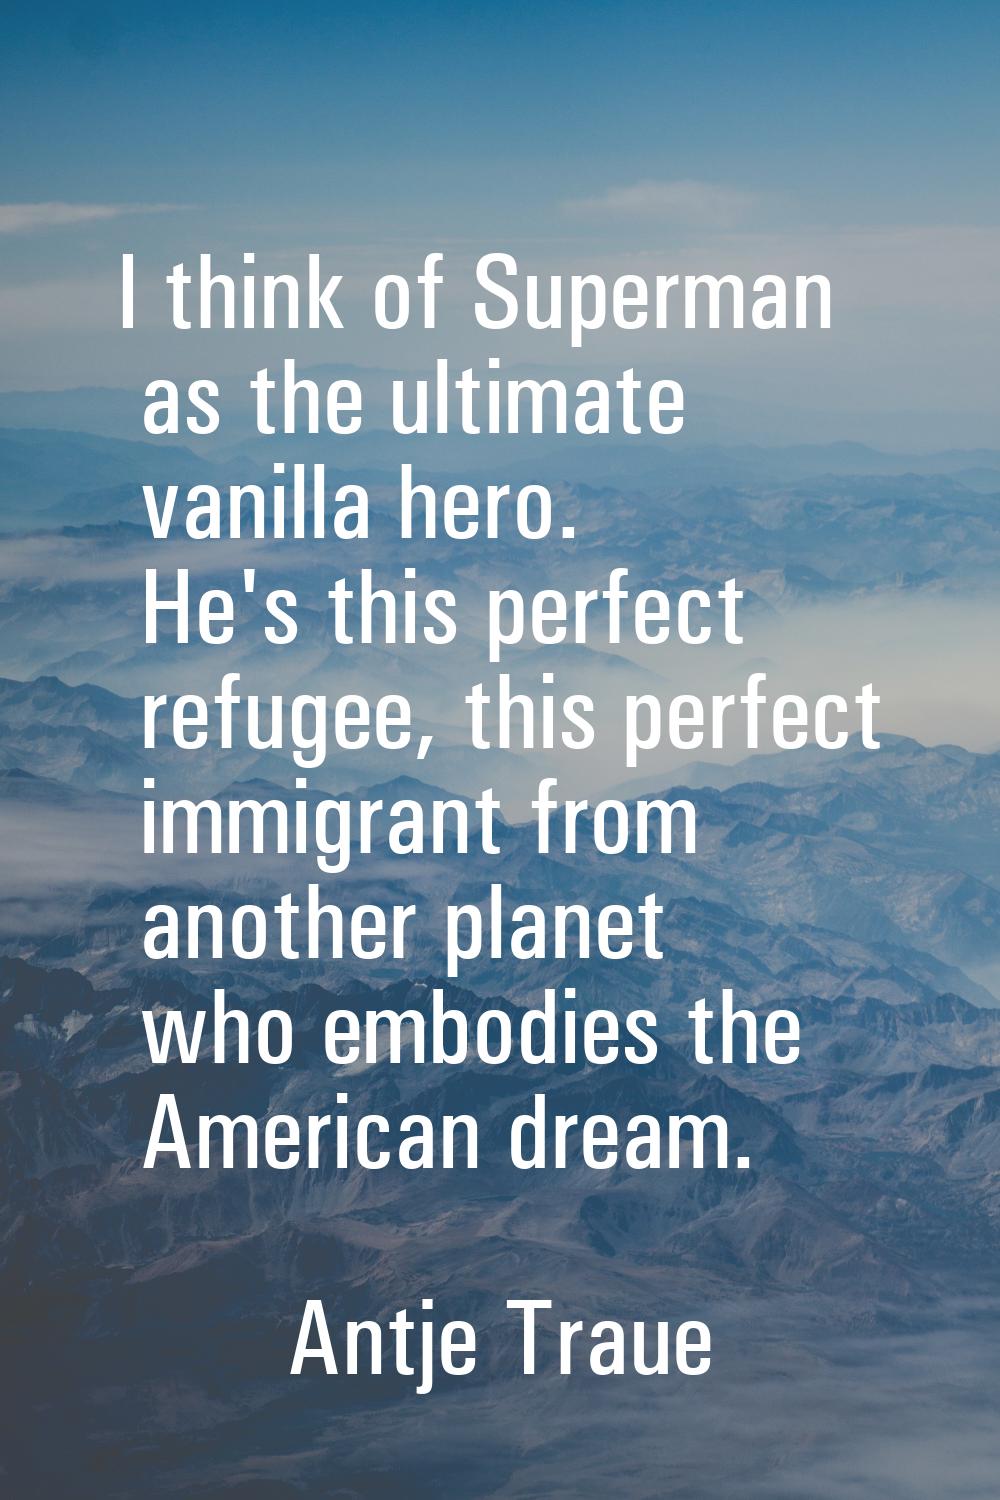 I think of Superman as the ultimate vanilla hero. He's this perfect refugee, this perfect immigrant